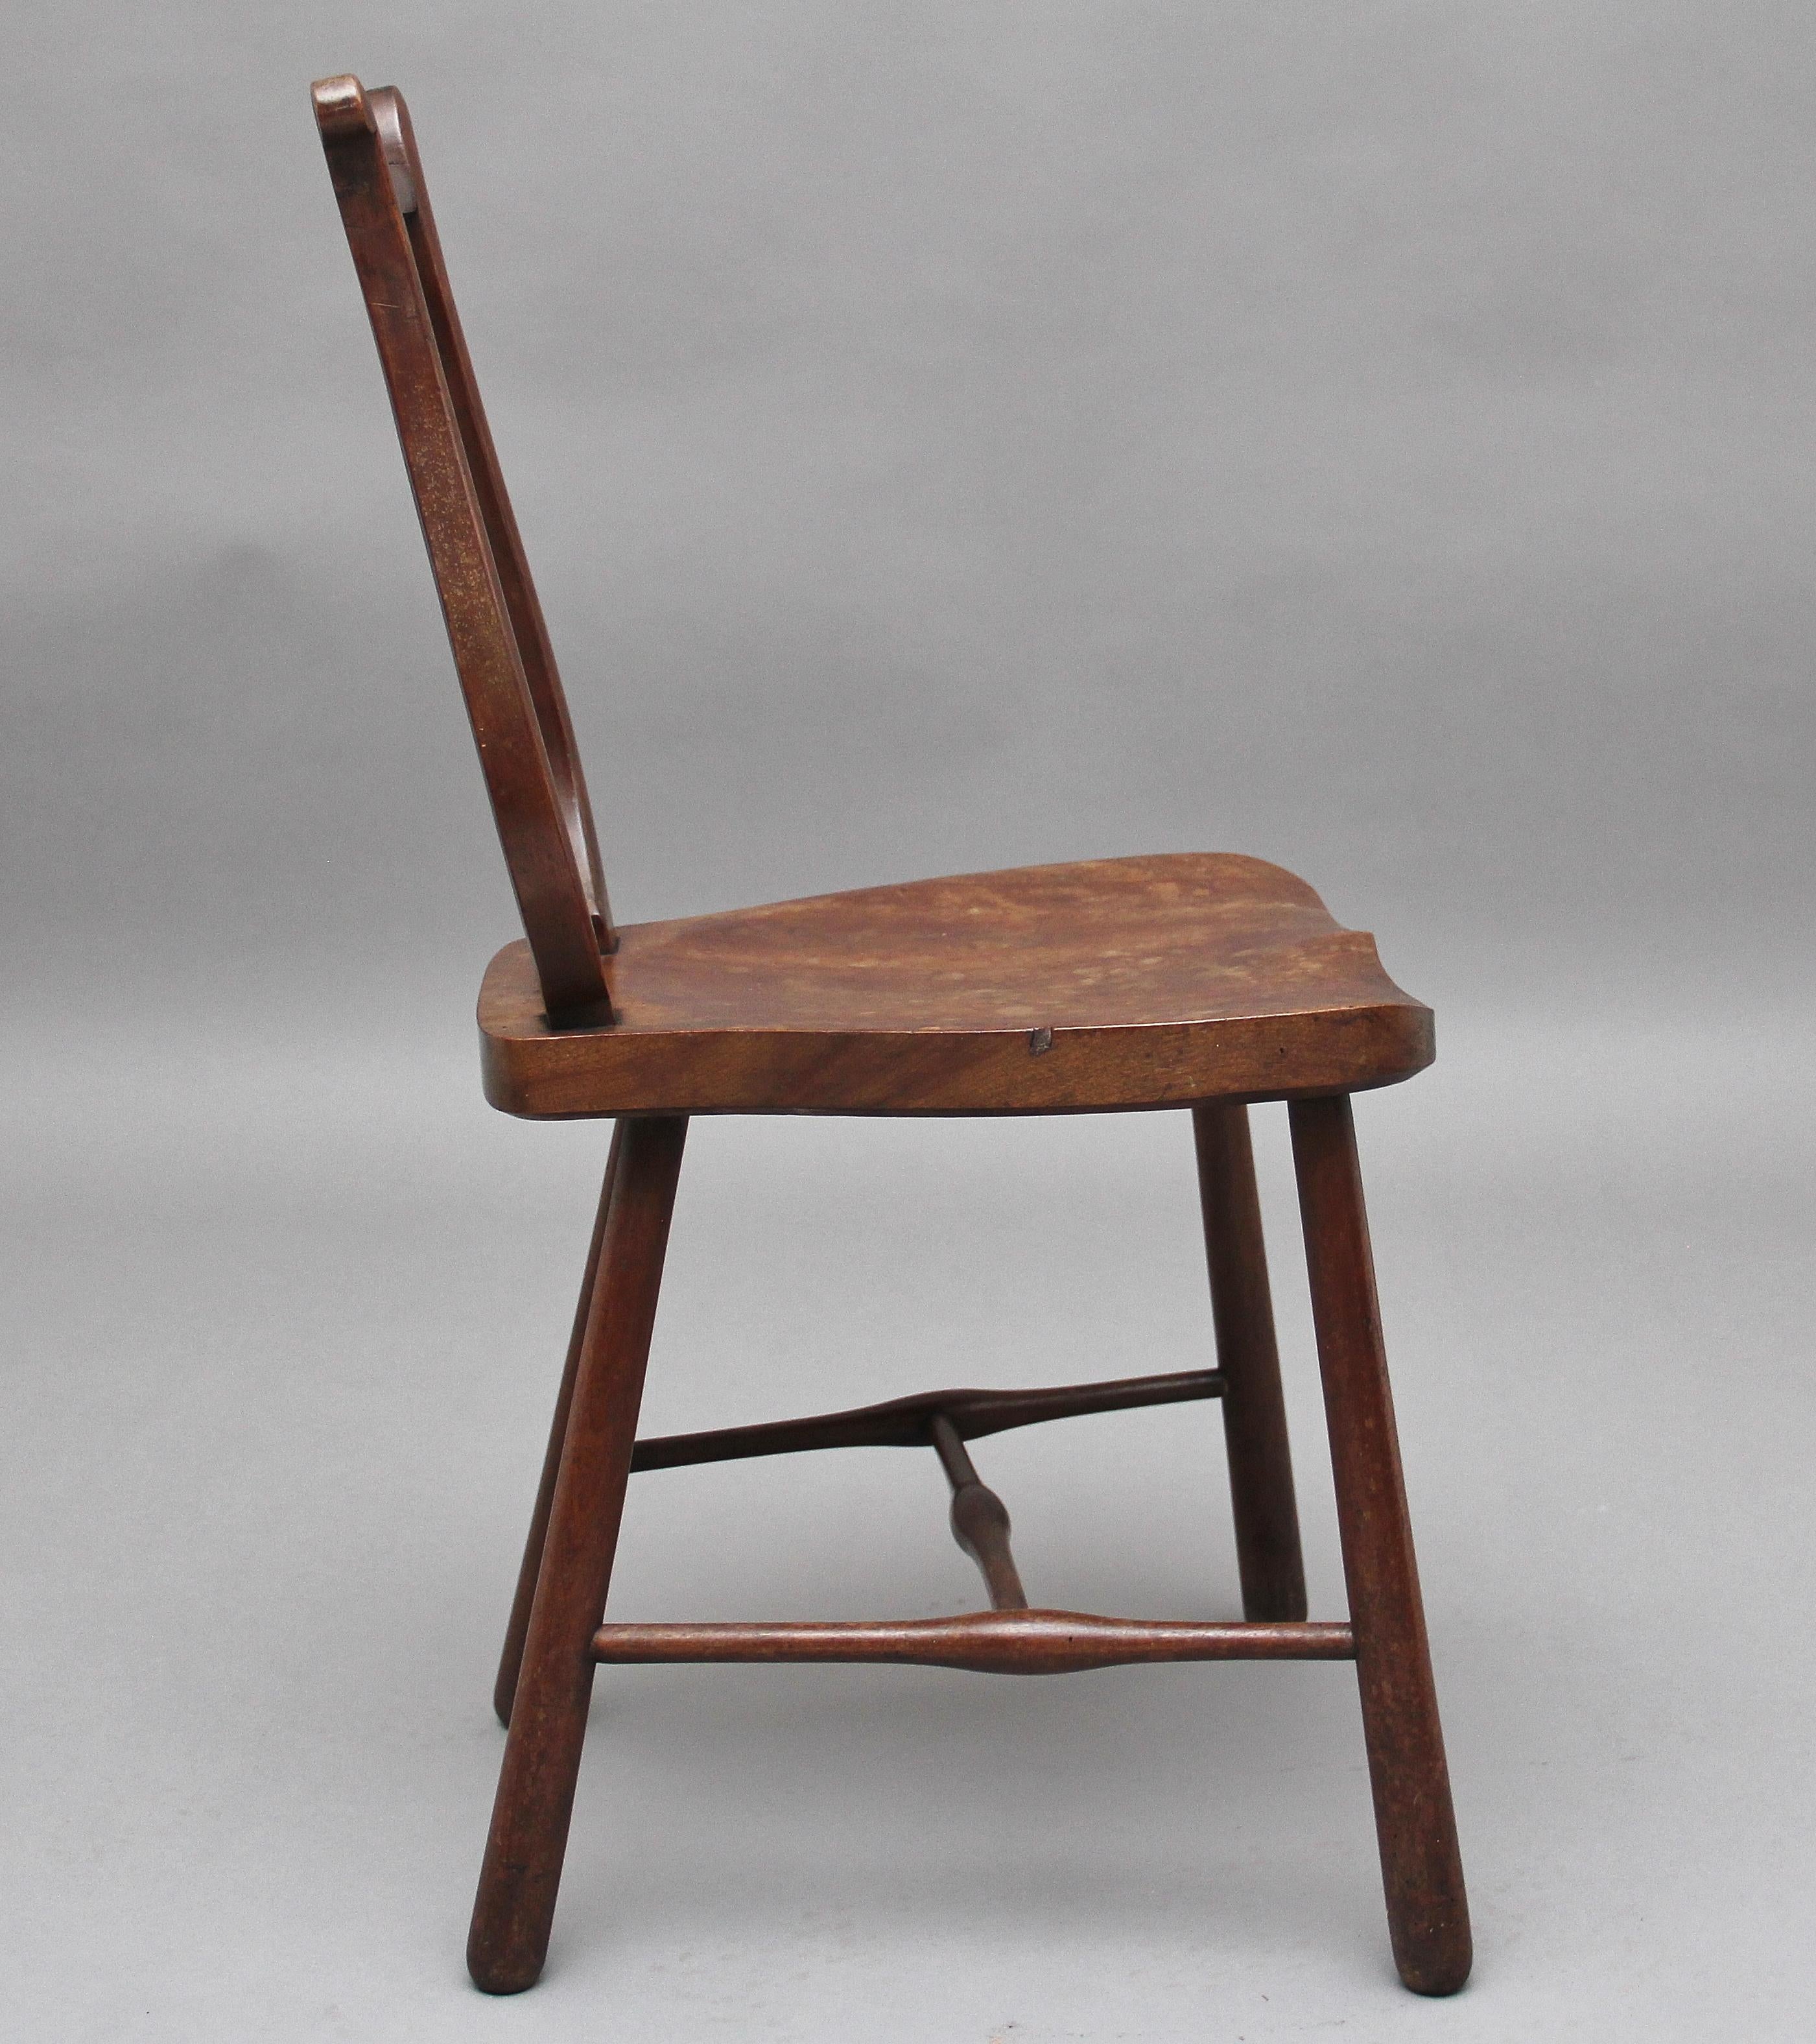 A lovely little early 19th century fruitwood country side chair, having a harp back incorporating four finely turned spindles, solid saddle seat, supported on out swept turned legs united by side and central stretcher, circa 1800.